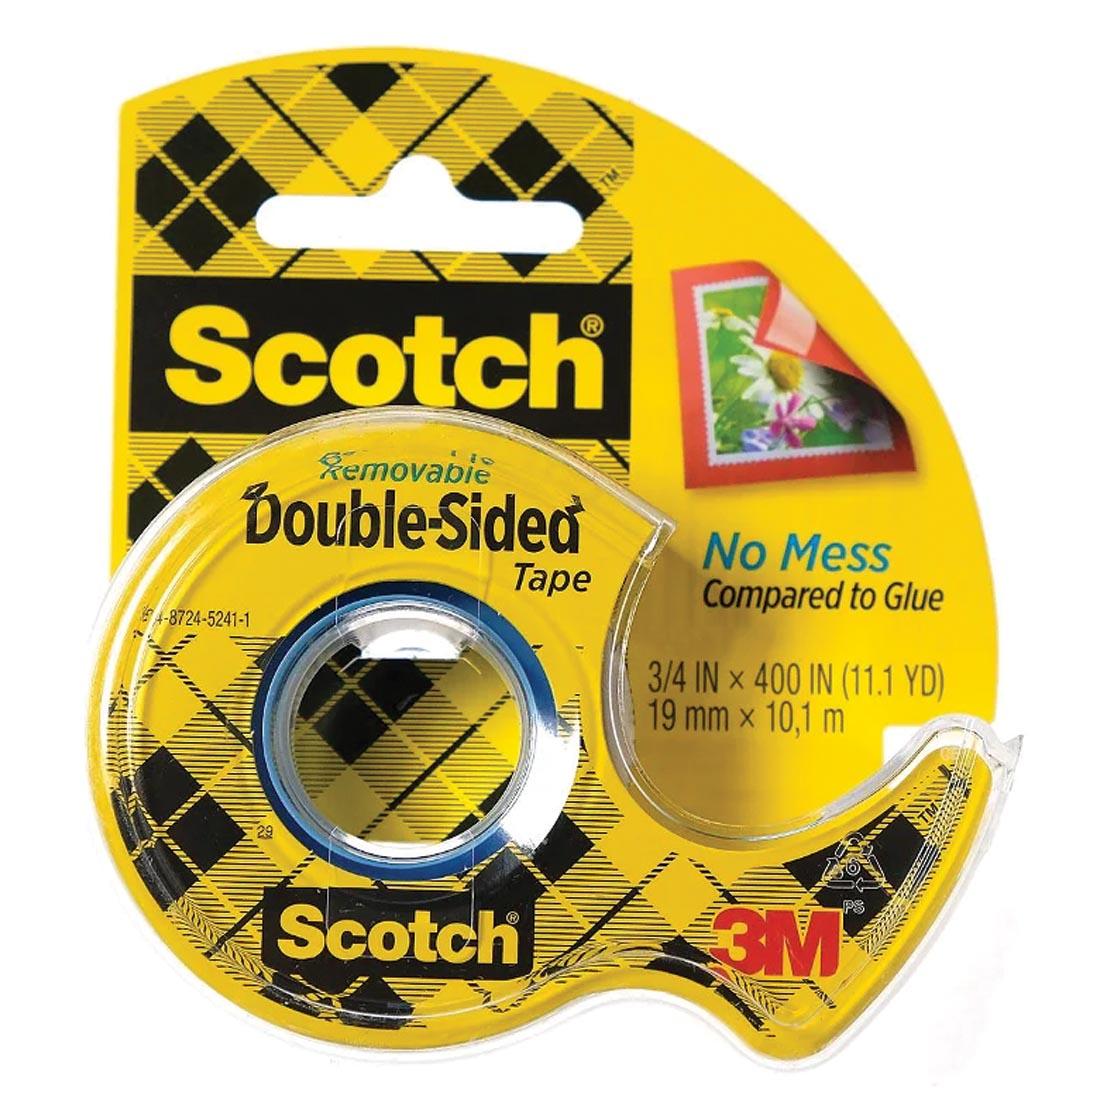 Scotch Double Sided Removable Tape dispenser pack, 3/4 x 400" roll